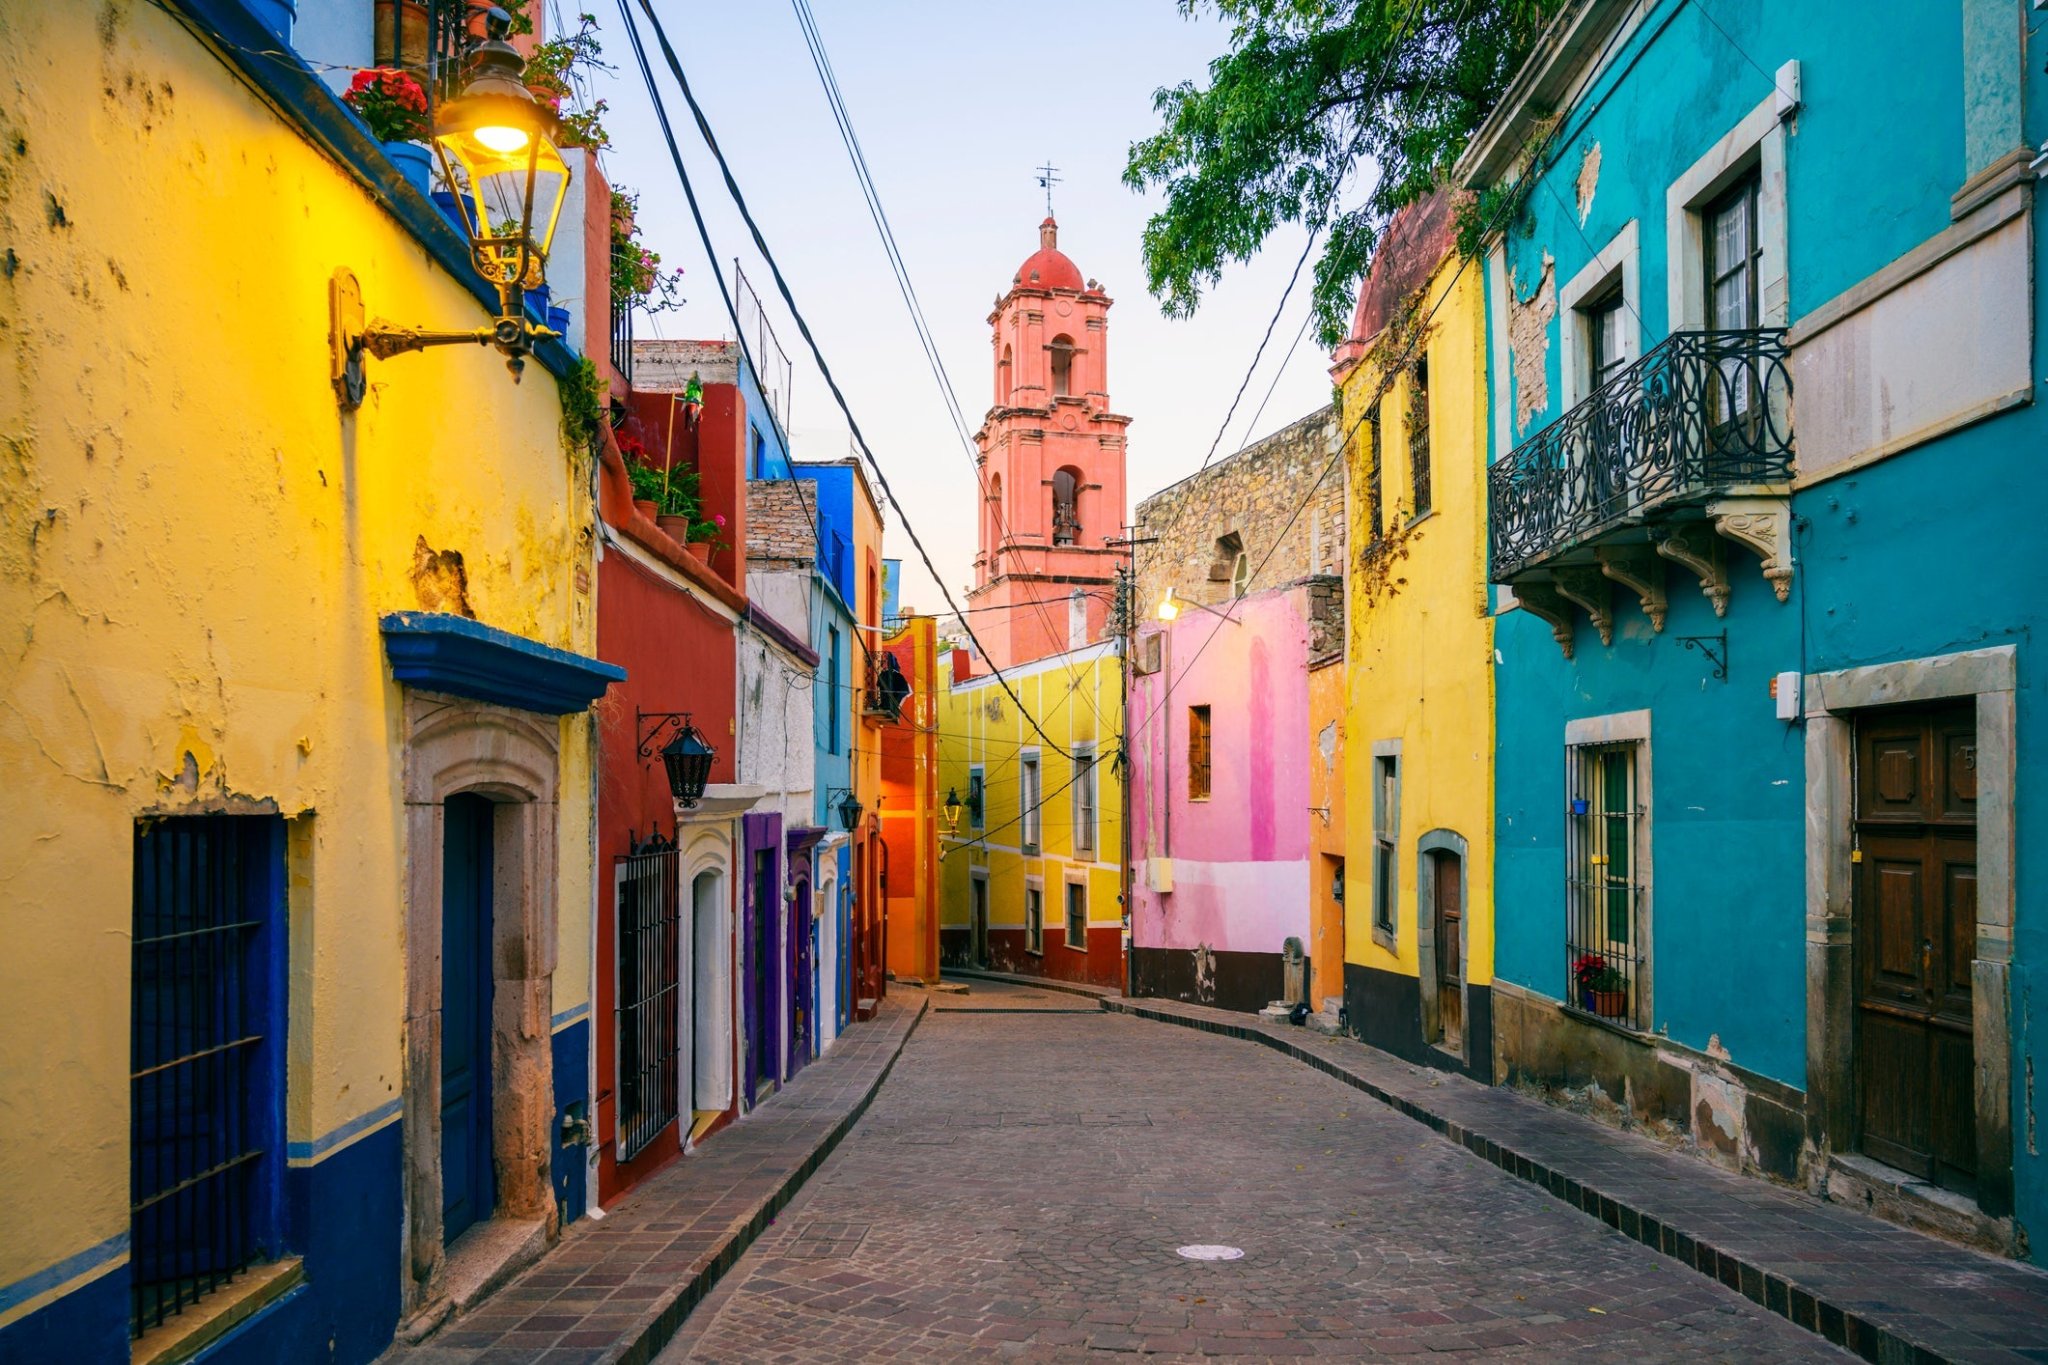 13 of the most beautiful villages and small towns in Mexico